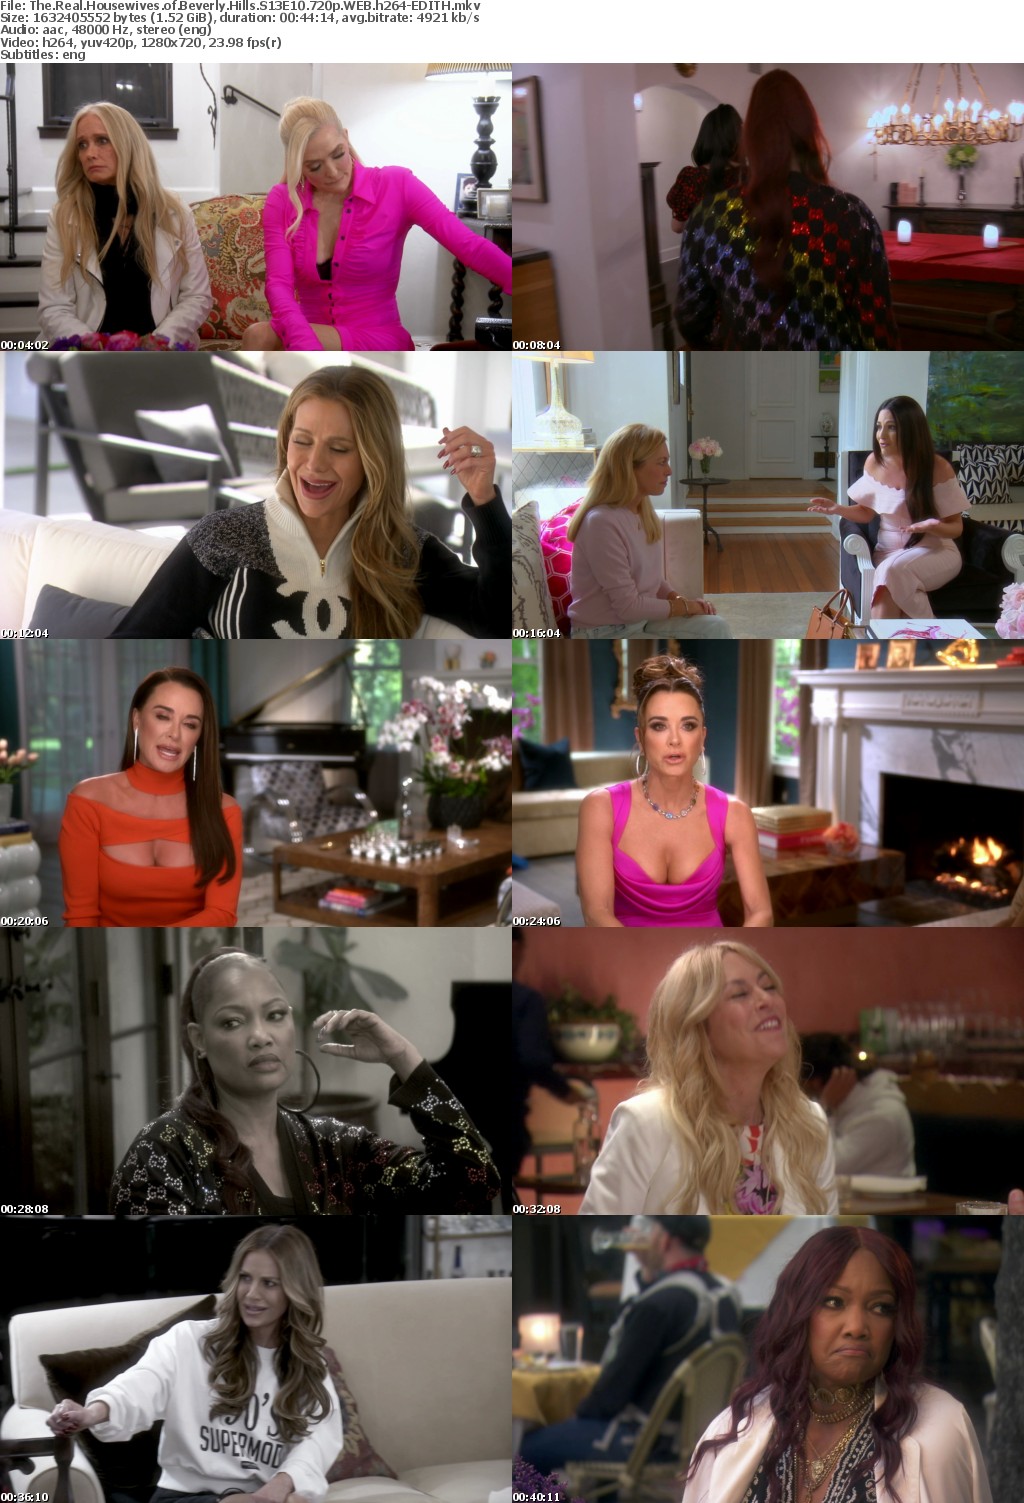 The Real Housewives of Beverly Hills S13E10 720p WEB h264-EDITH